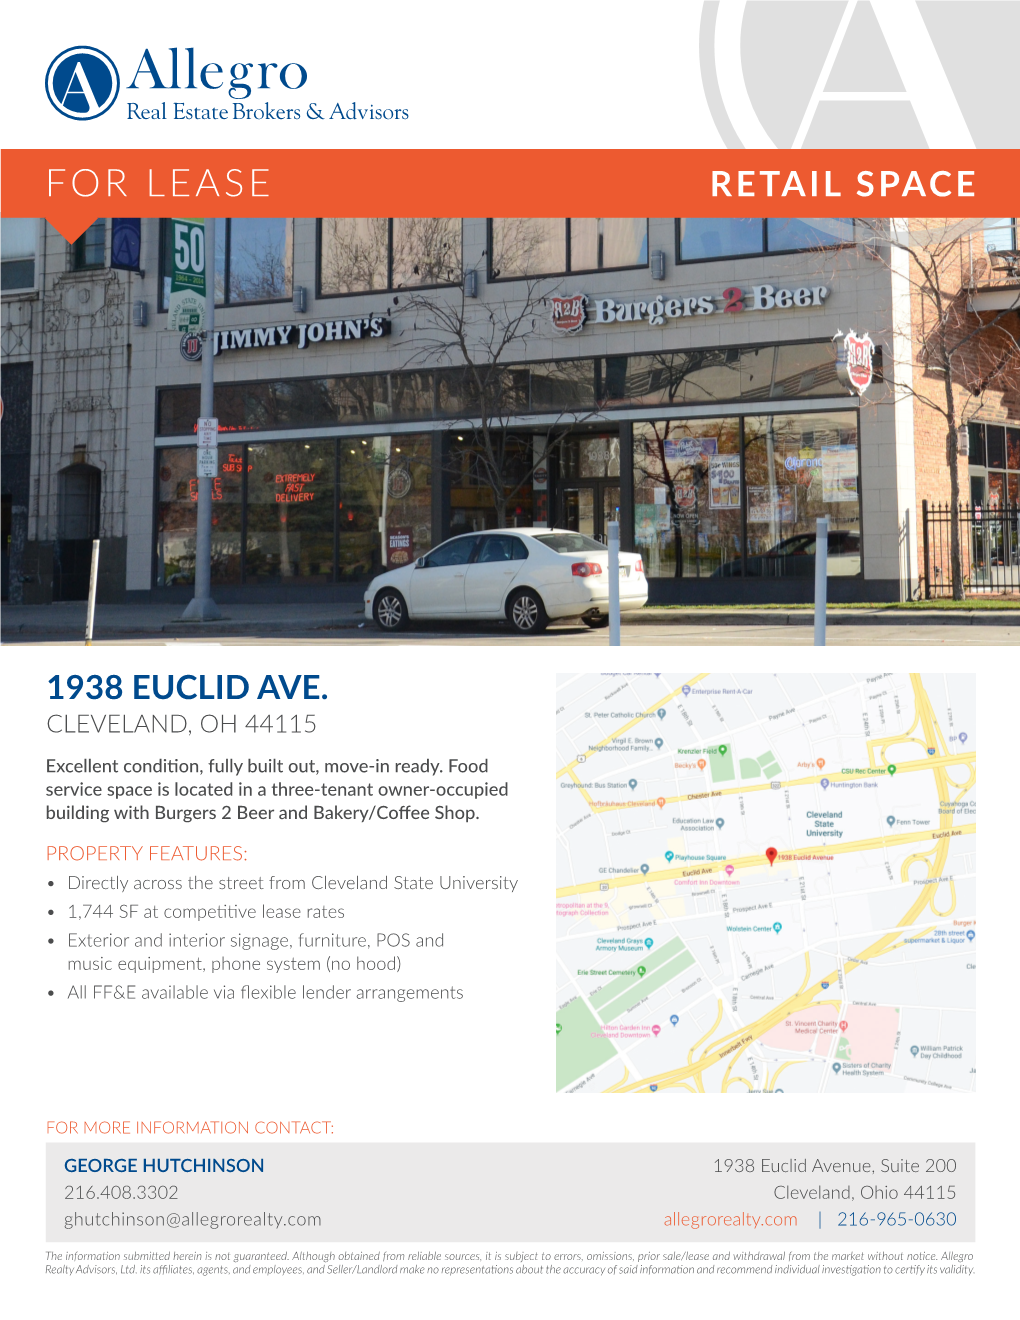 For Lease Retail Space